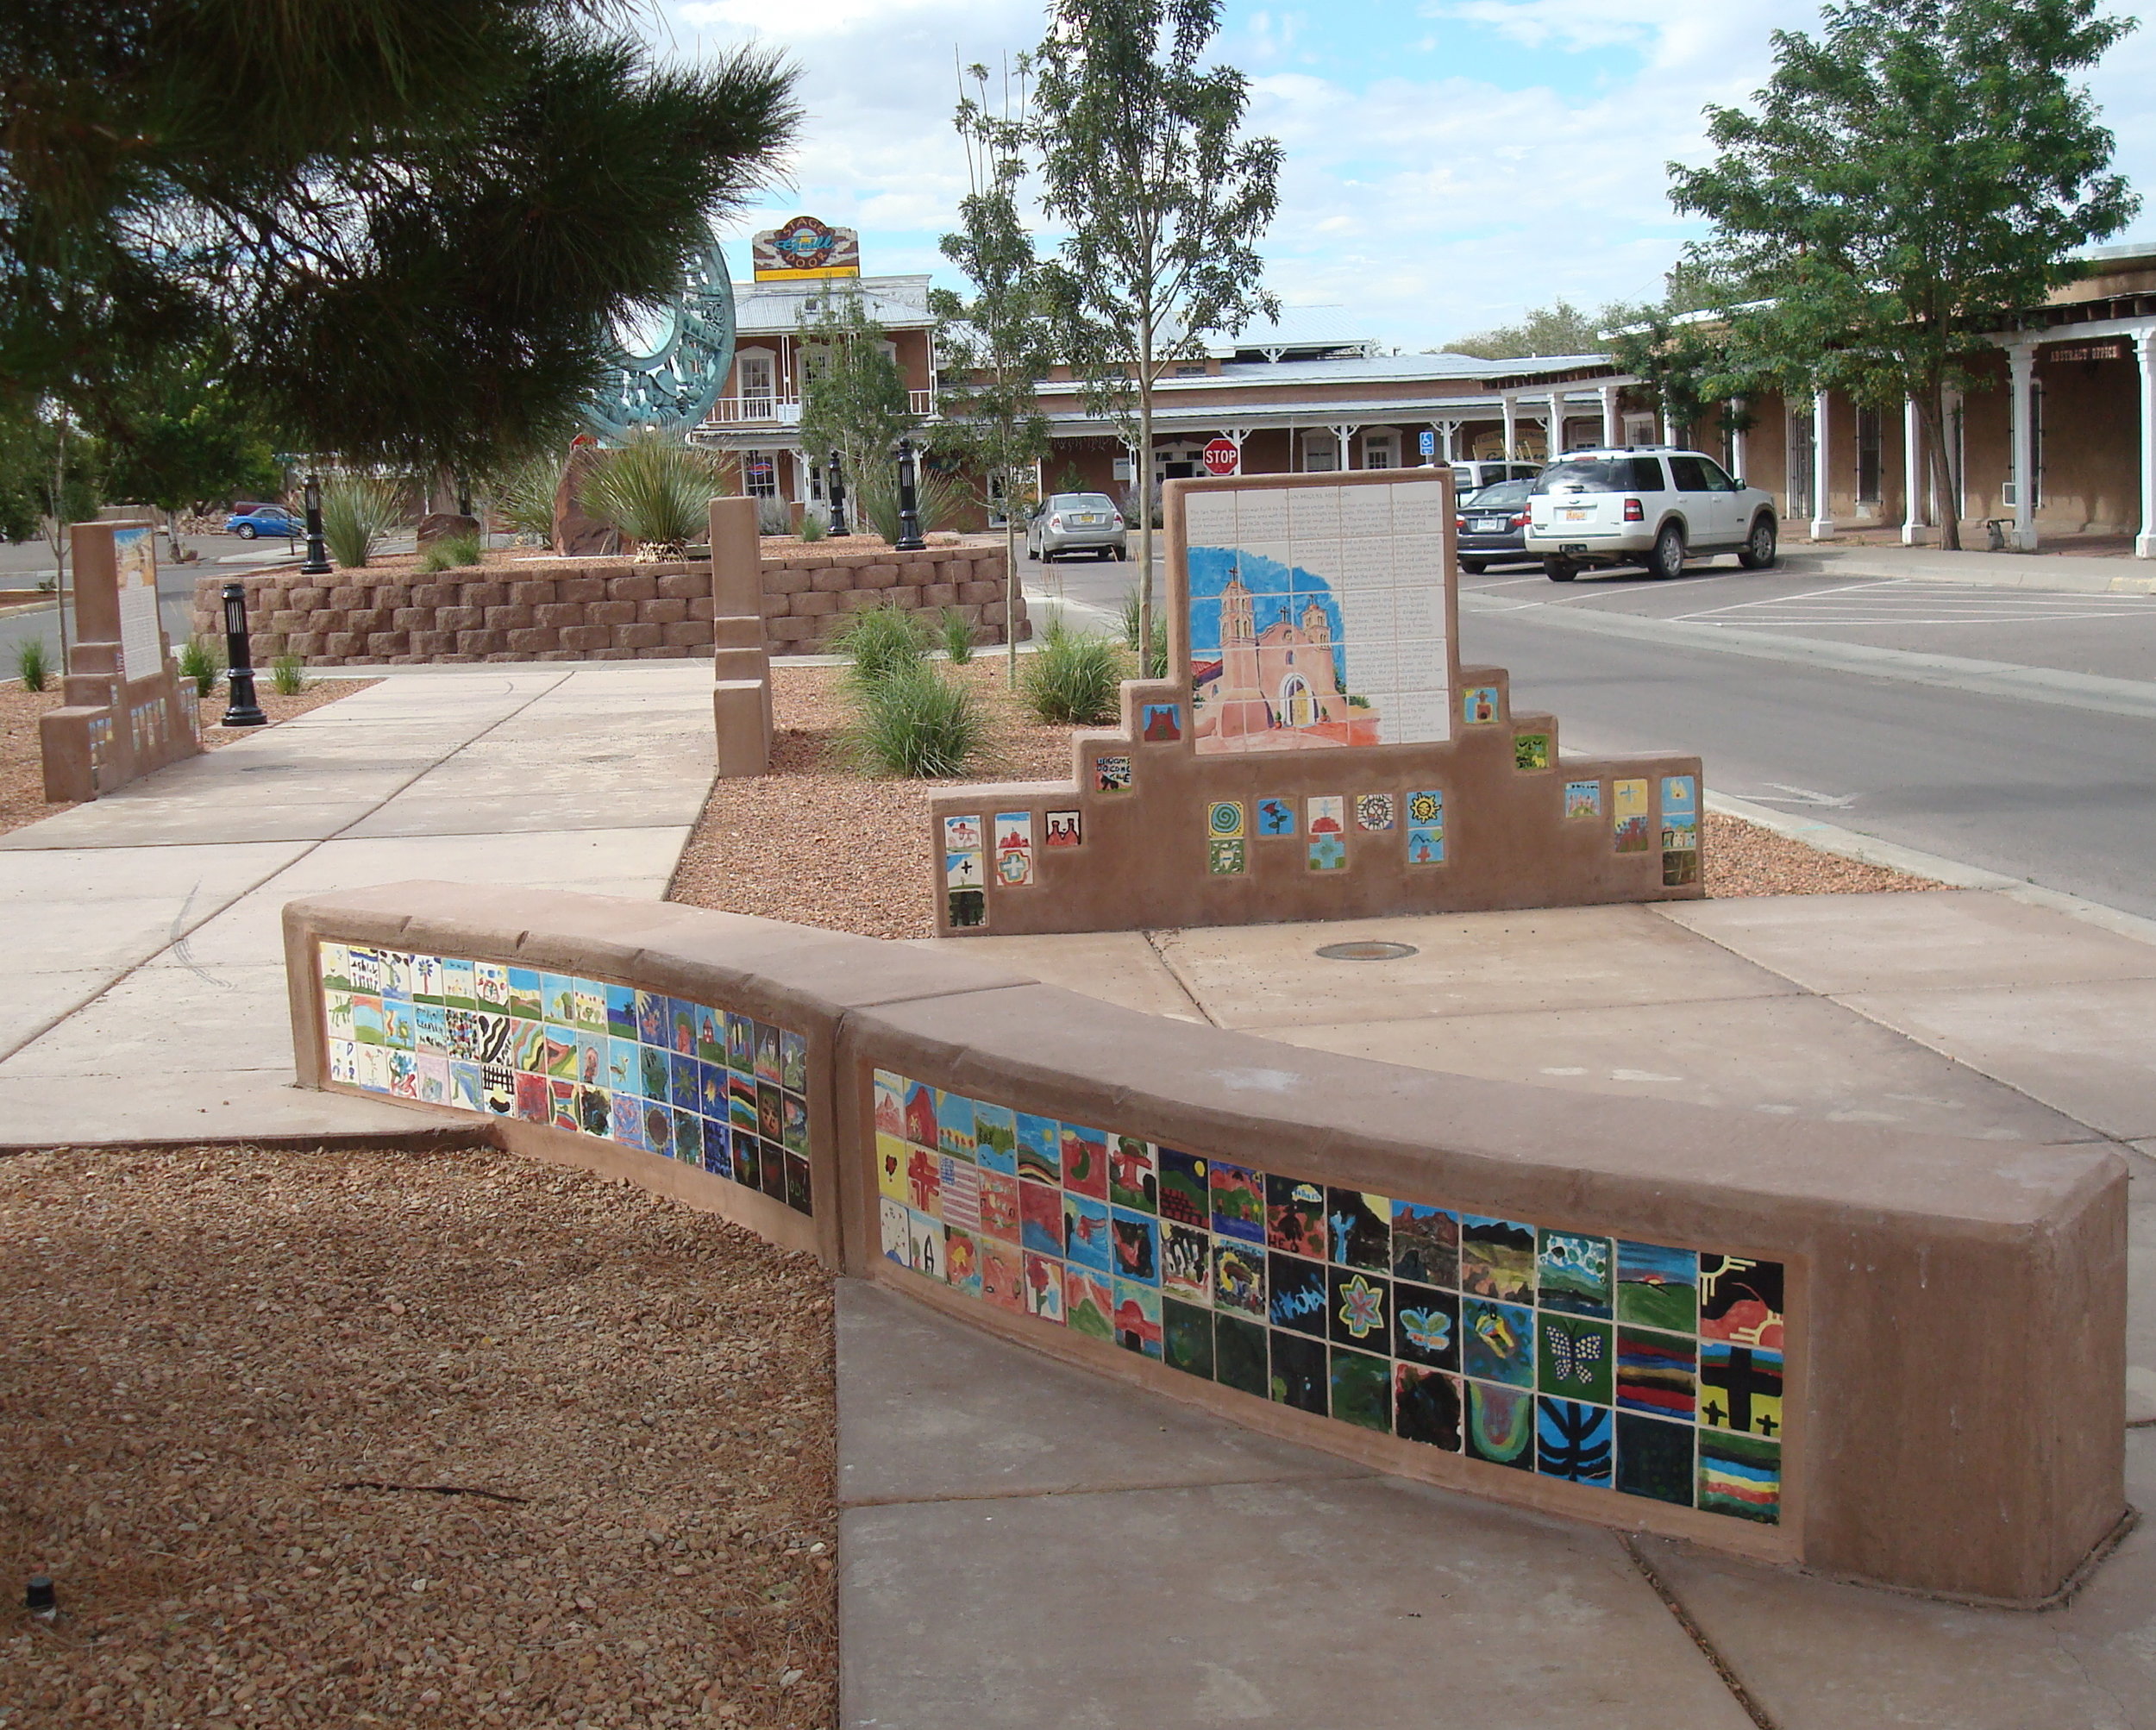 Installation project for the City of Socorro, NM